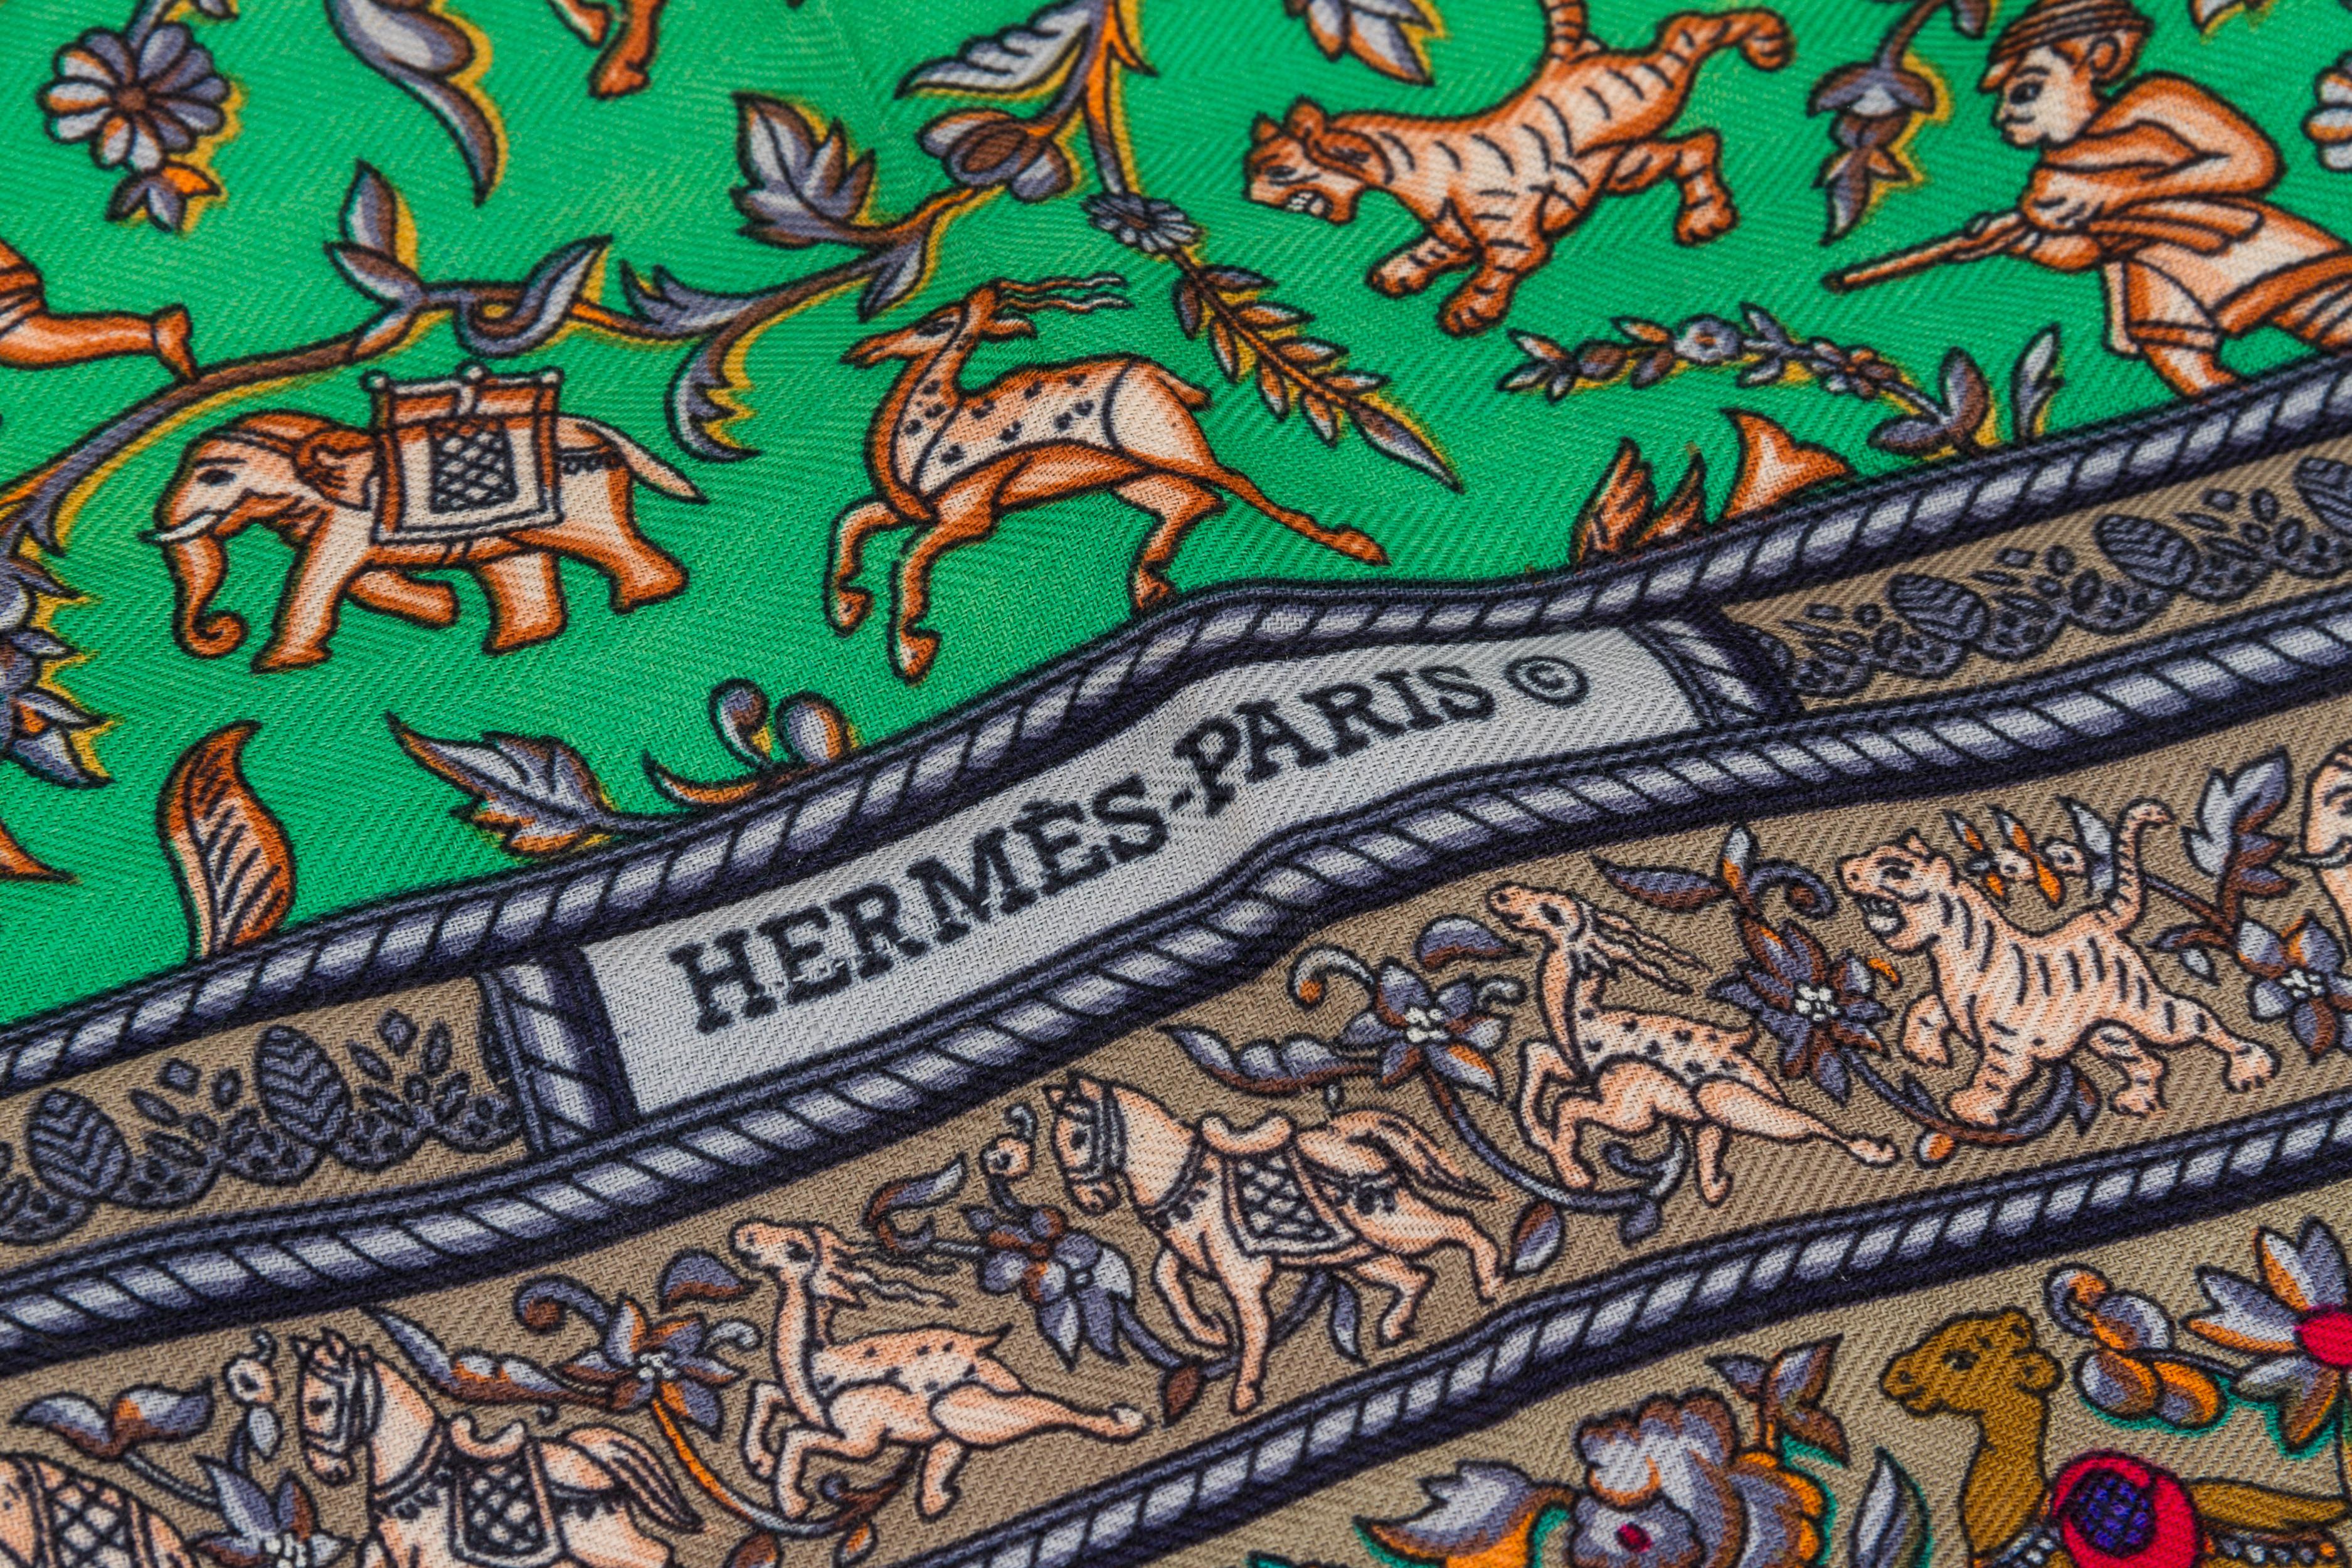 Hermès Chasse En Inde Cashmere Shawl In Good Condition For Sale In West Hollywood, CA